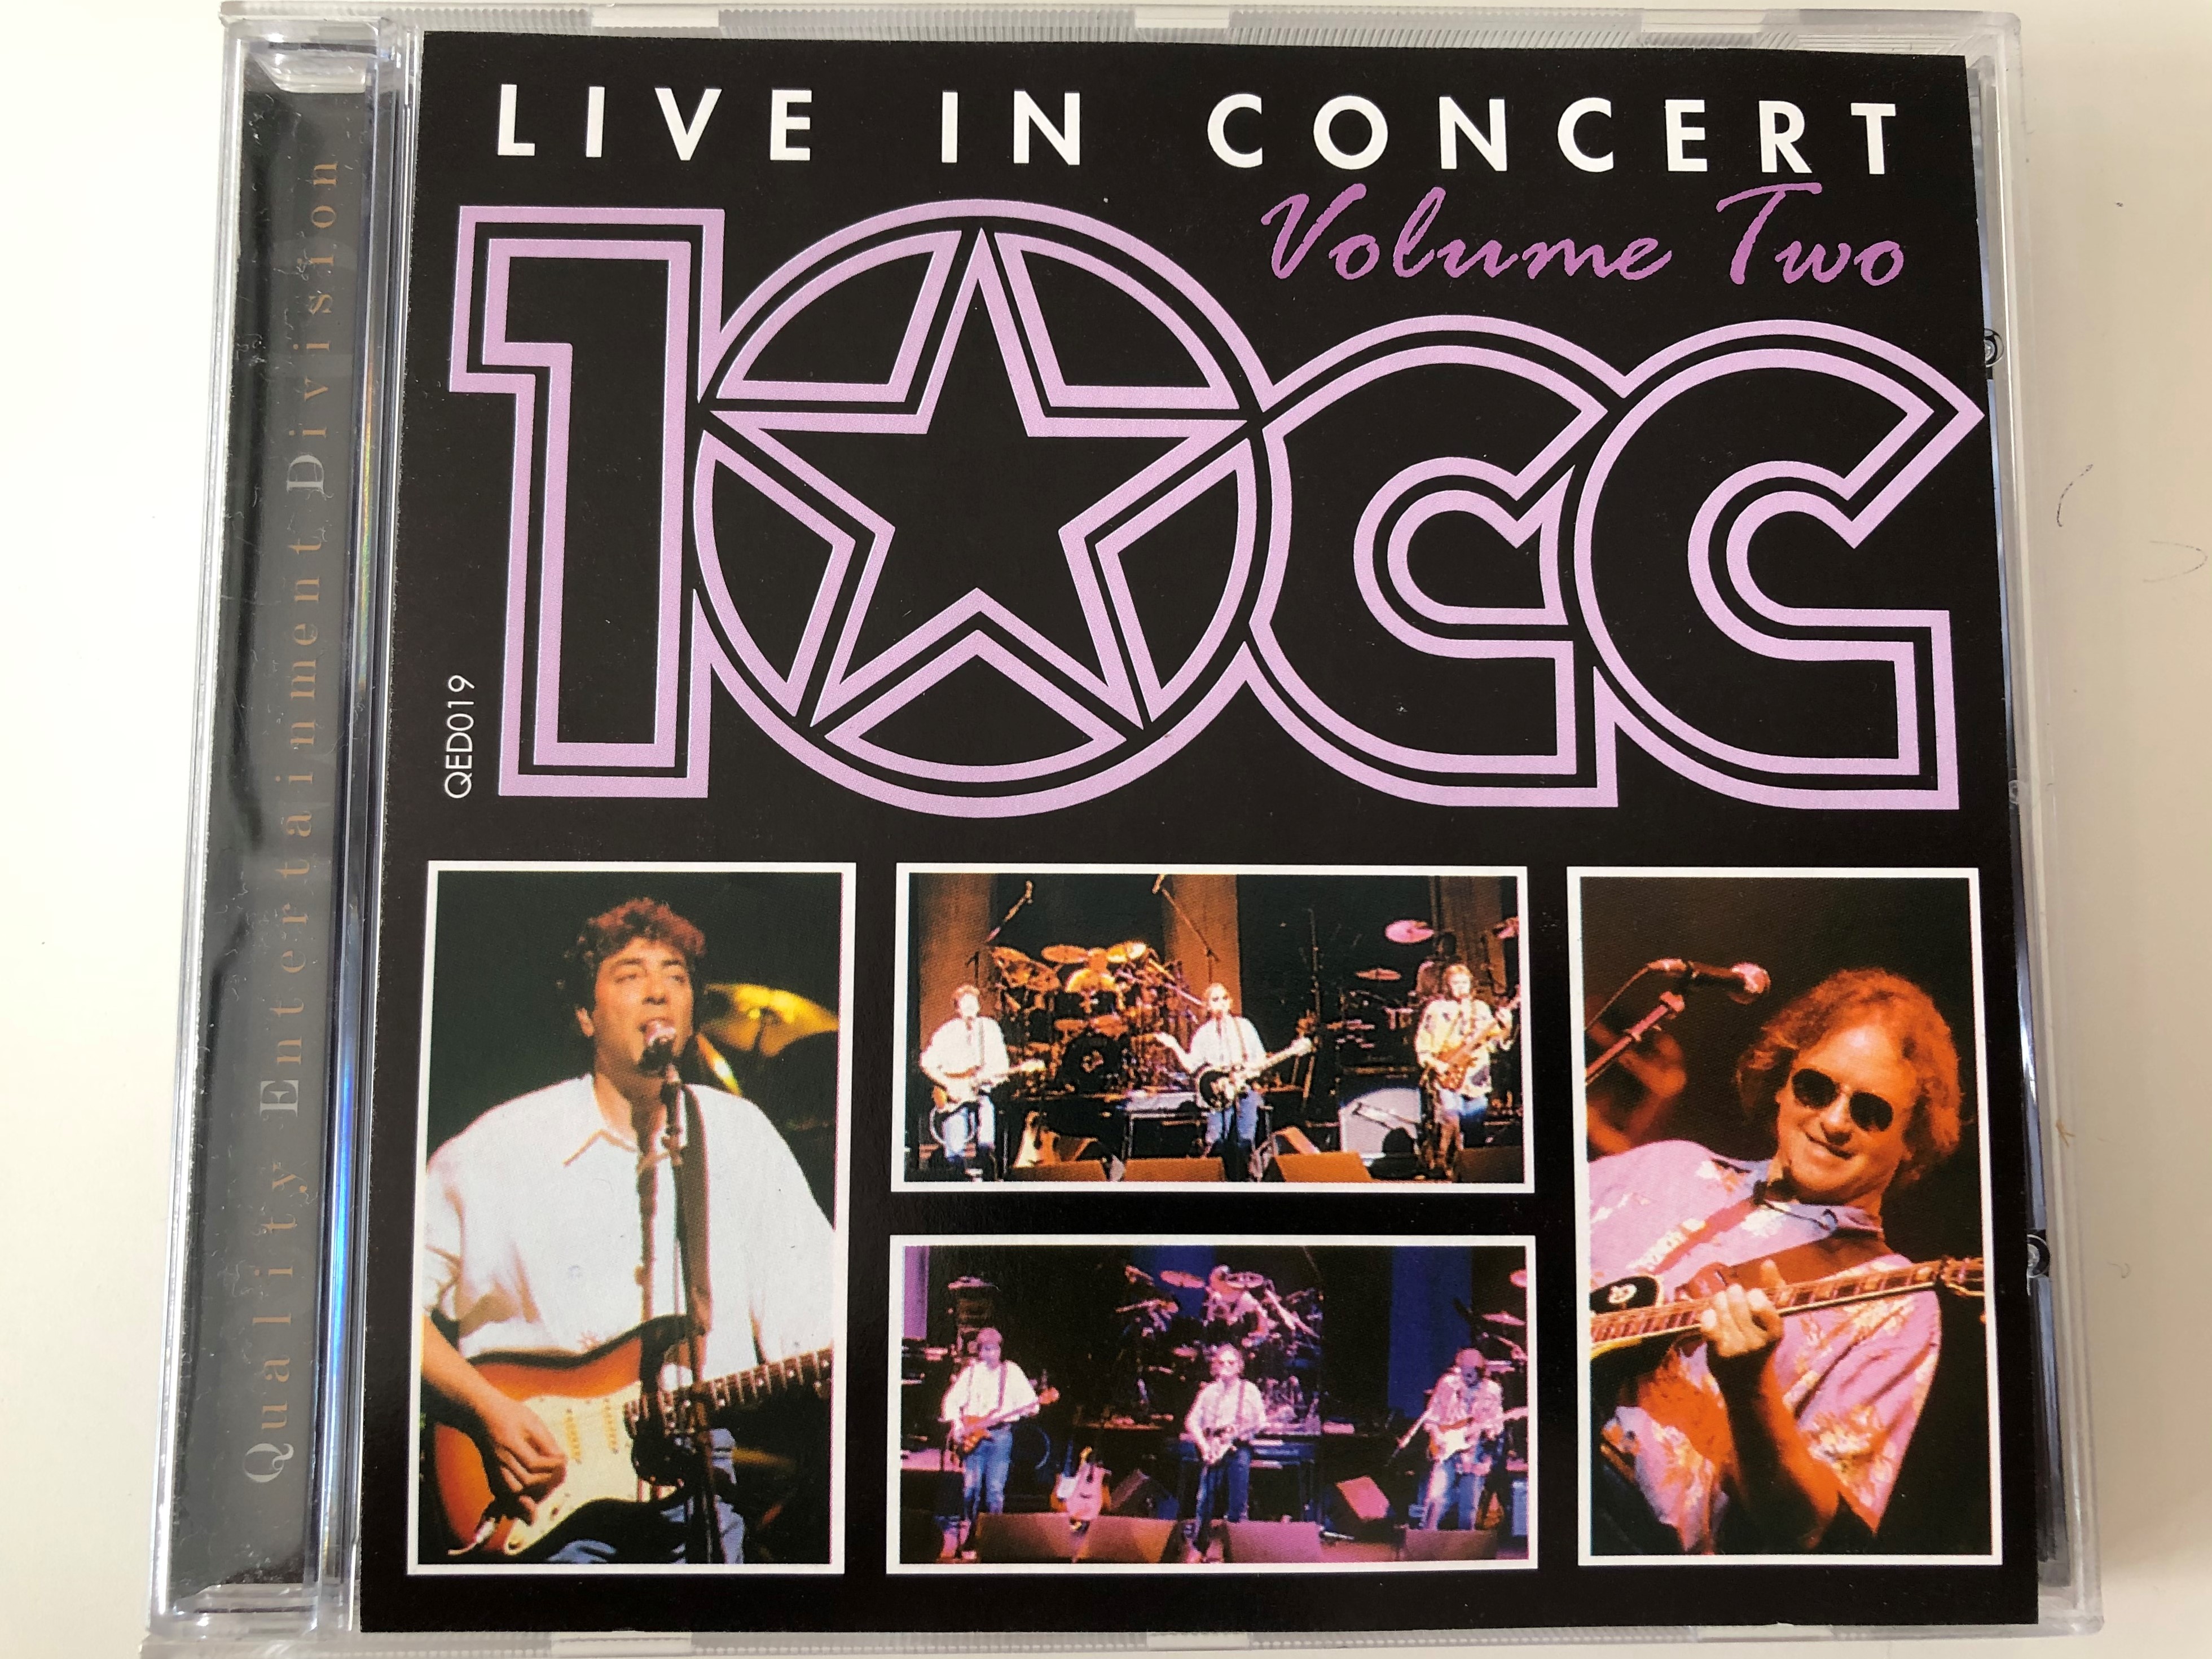 live-in-concert-volume-two-10cc-qed-audio-cd-qed019-1-.jpg